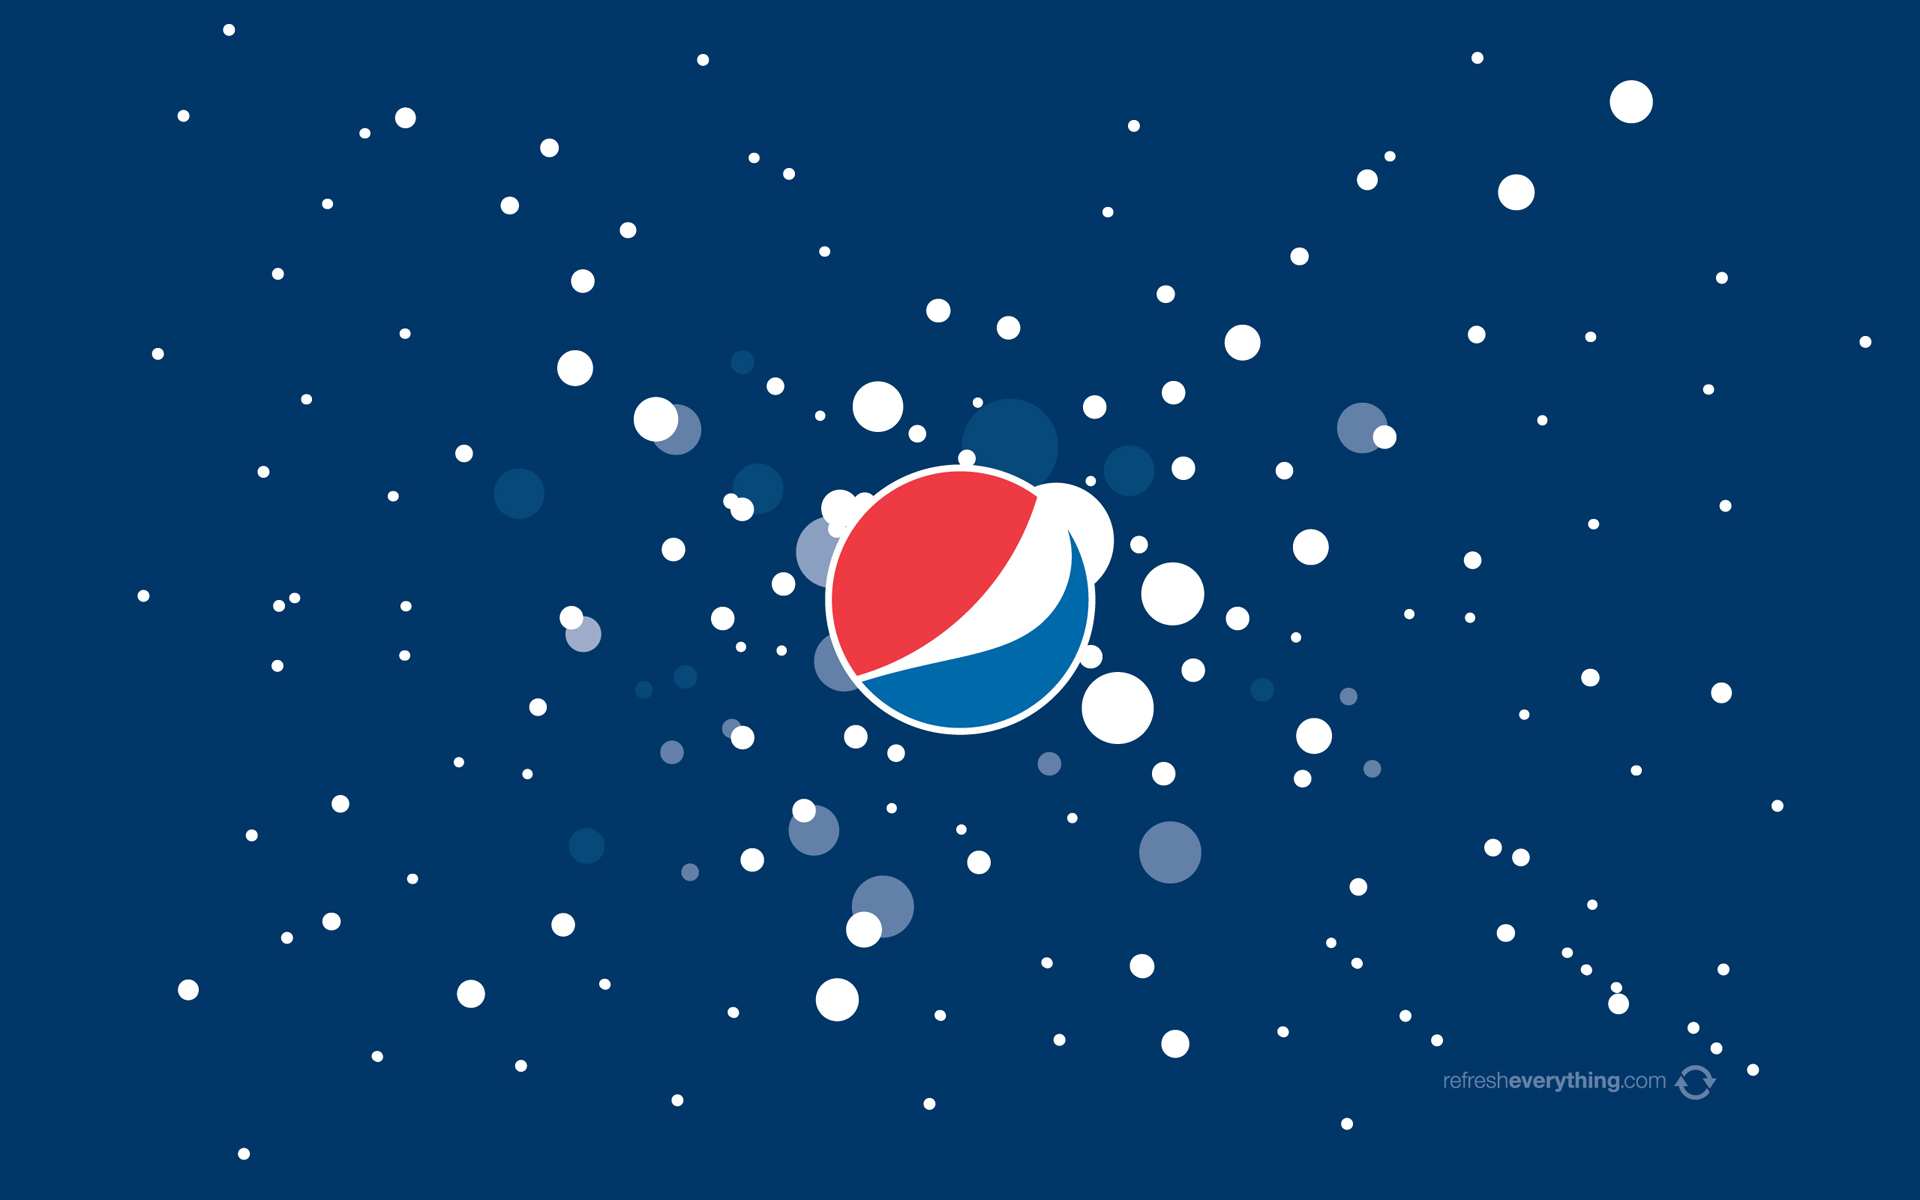 Image Mind Blowing Pepsi Wallpaper Animated Background